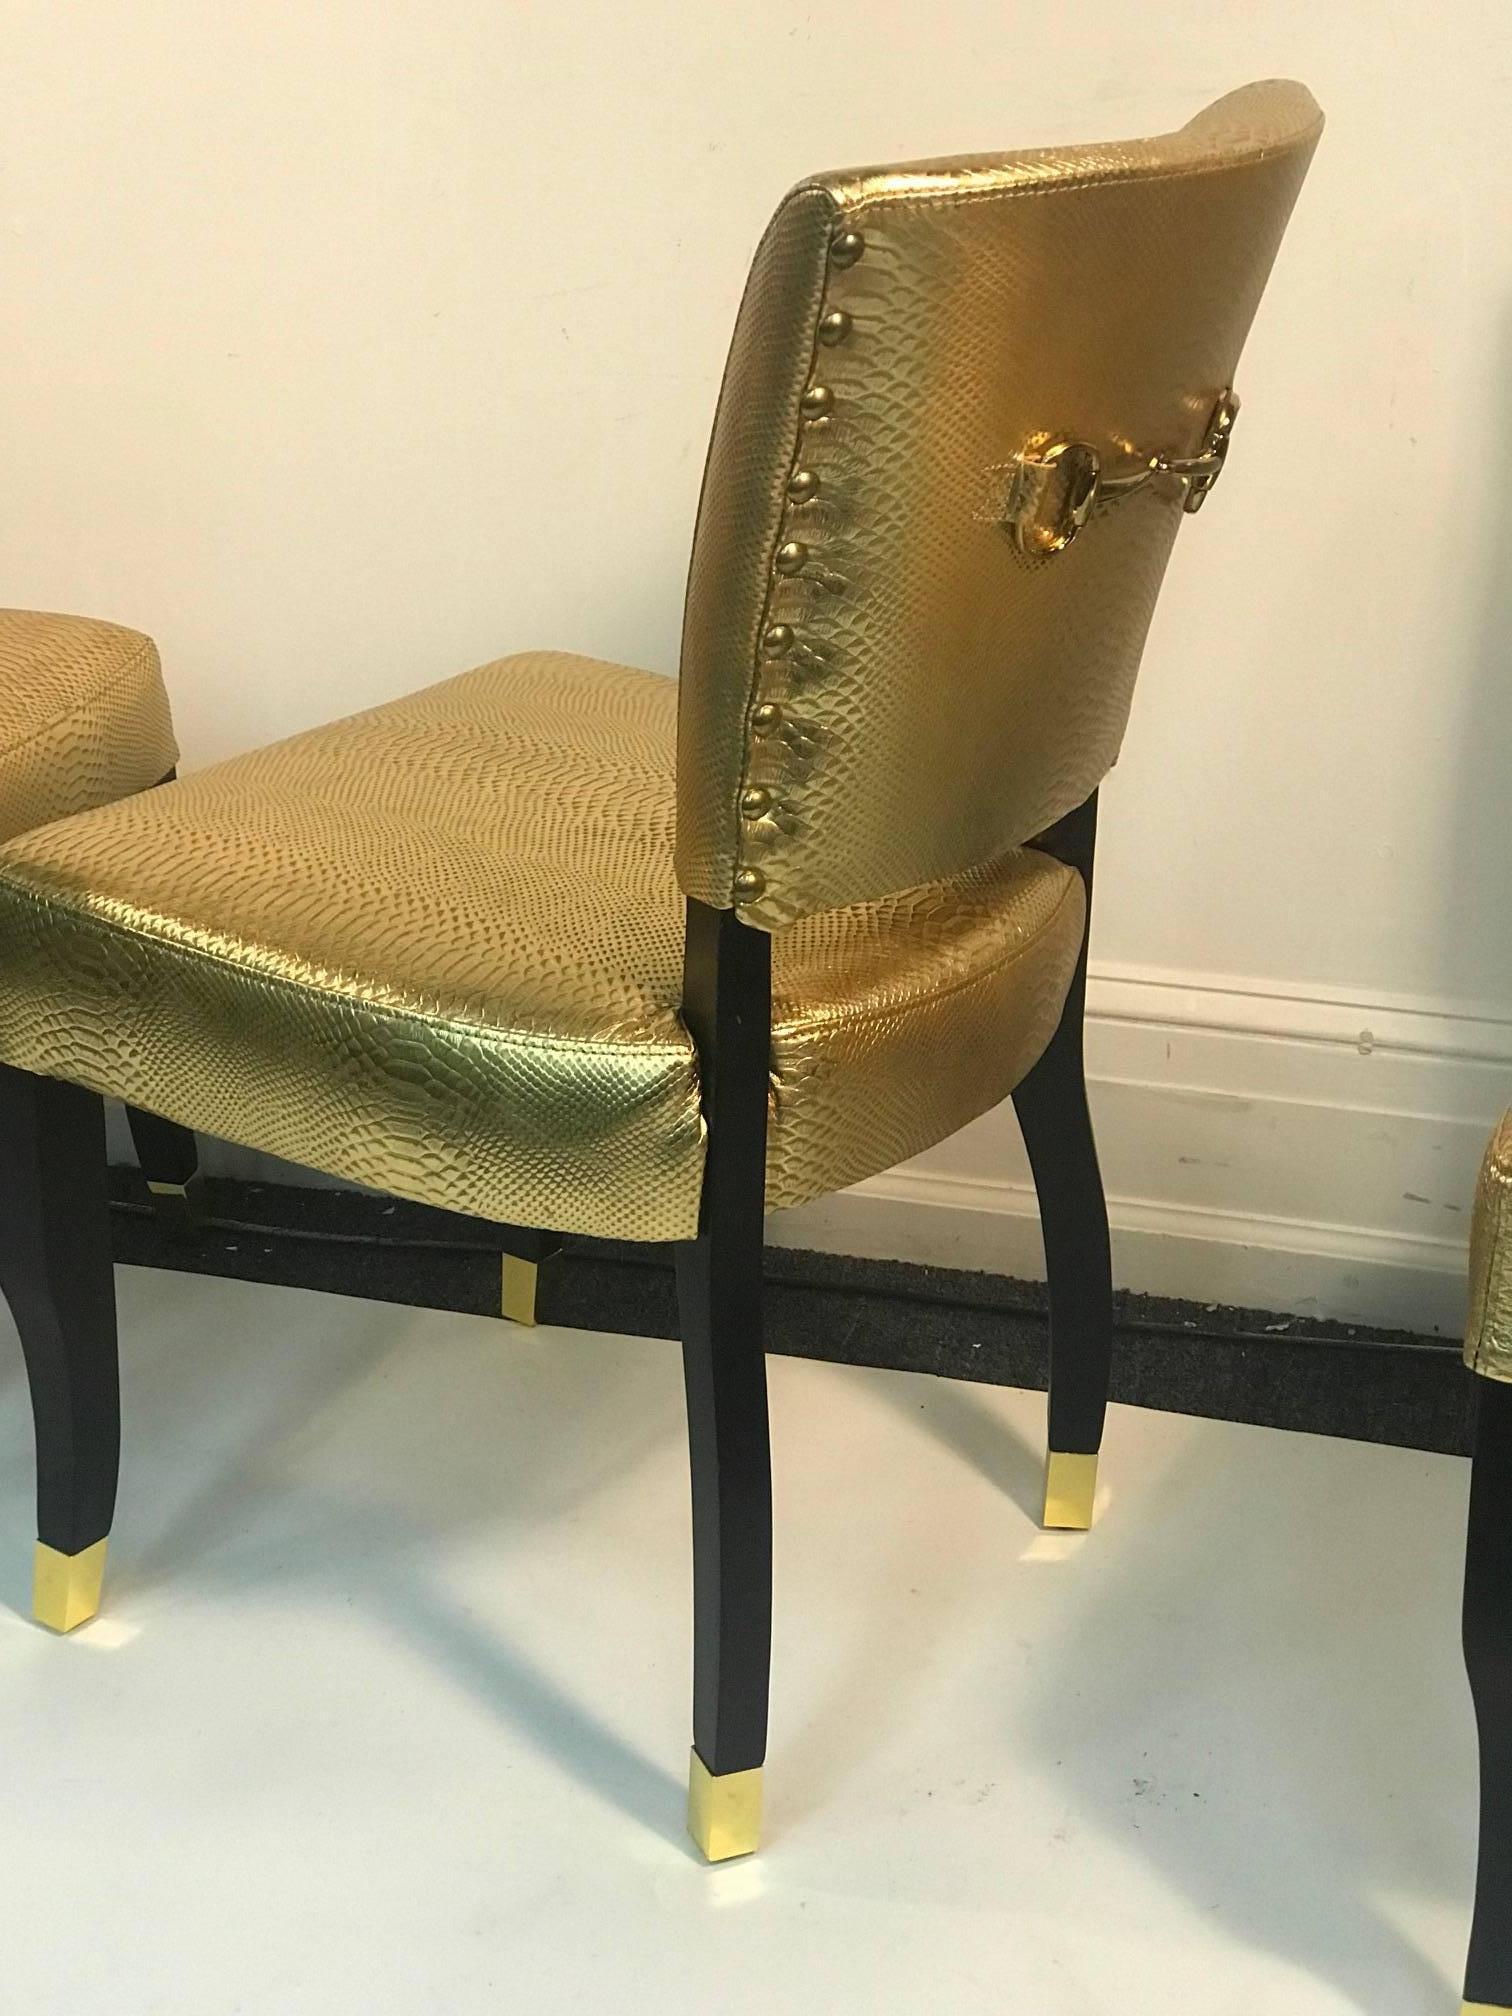 Suite of Eight Gold Faux Snakeskin Chairs with Decorative Gold Buckle Backs In Excellent Condition For Sale In Allentown, PA